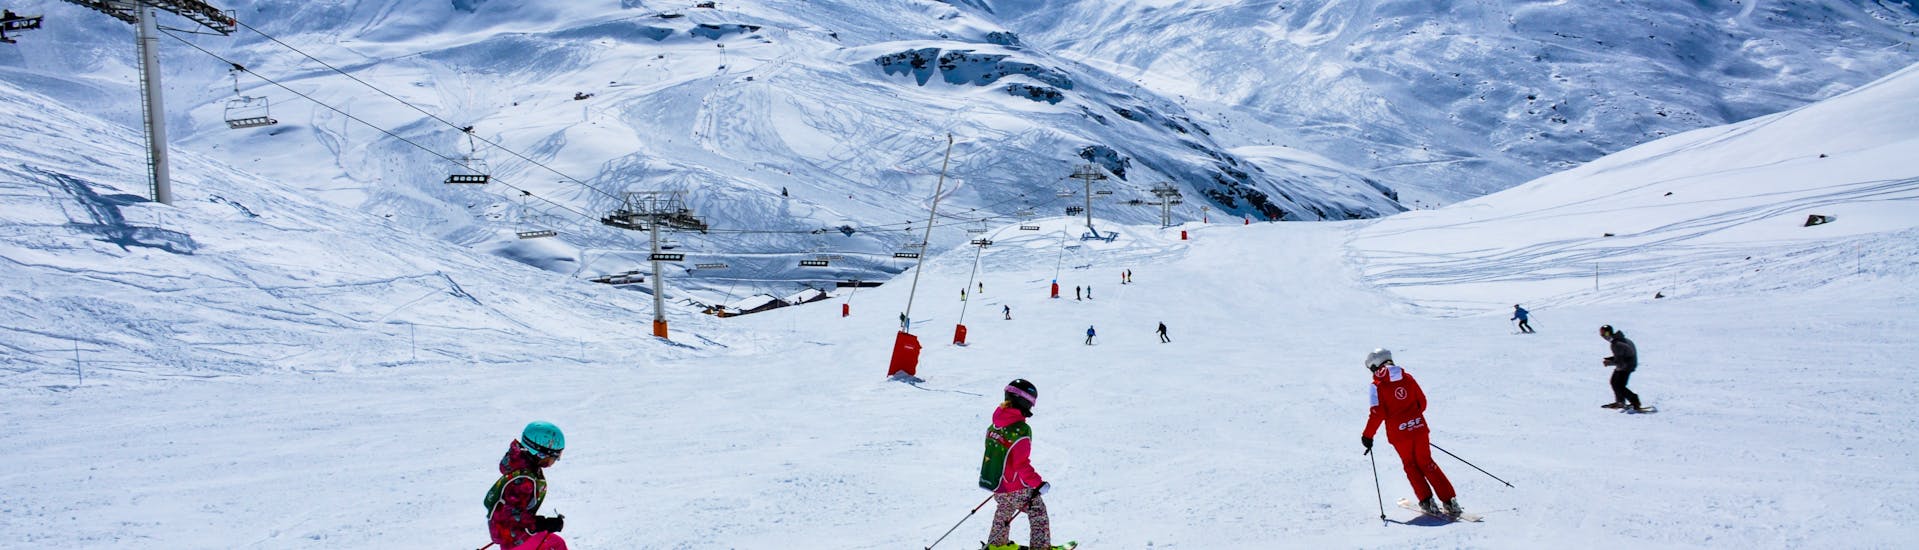 During a Super 6 kids ski lesson of ESF Val Thorens, young skiers descend a slope with their instructor.